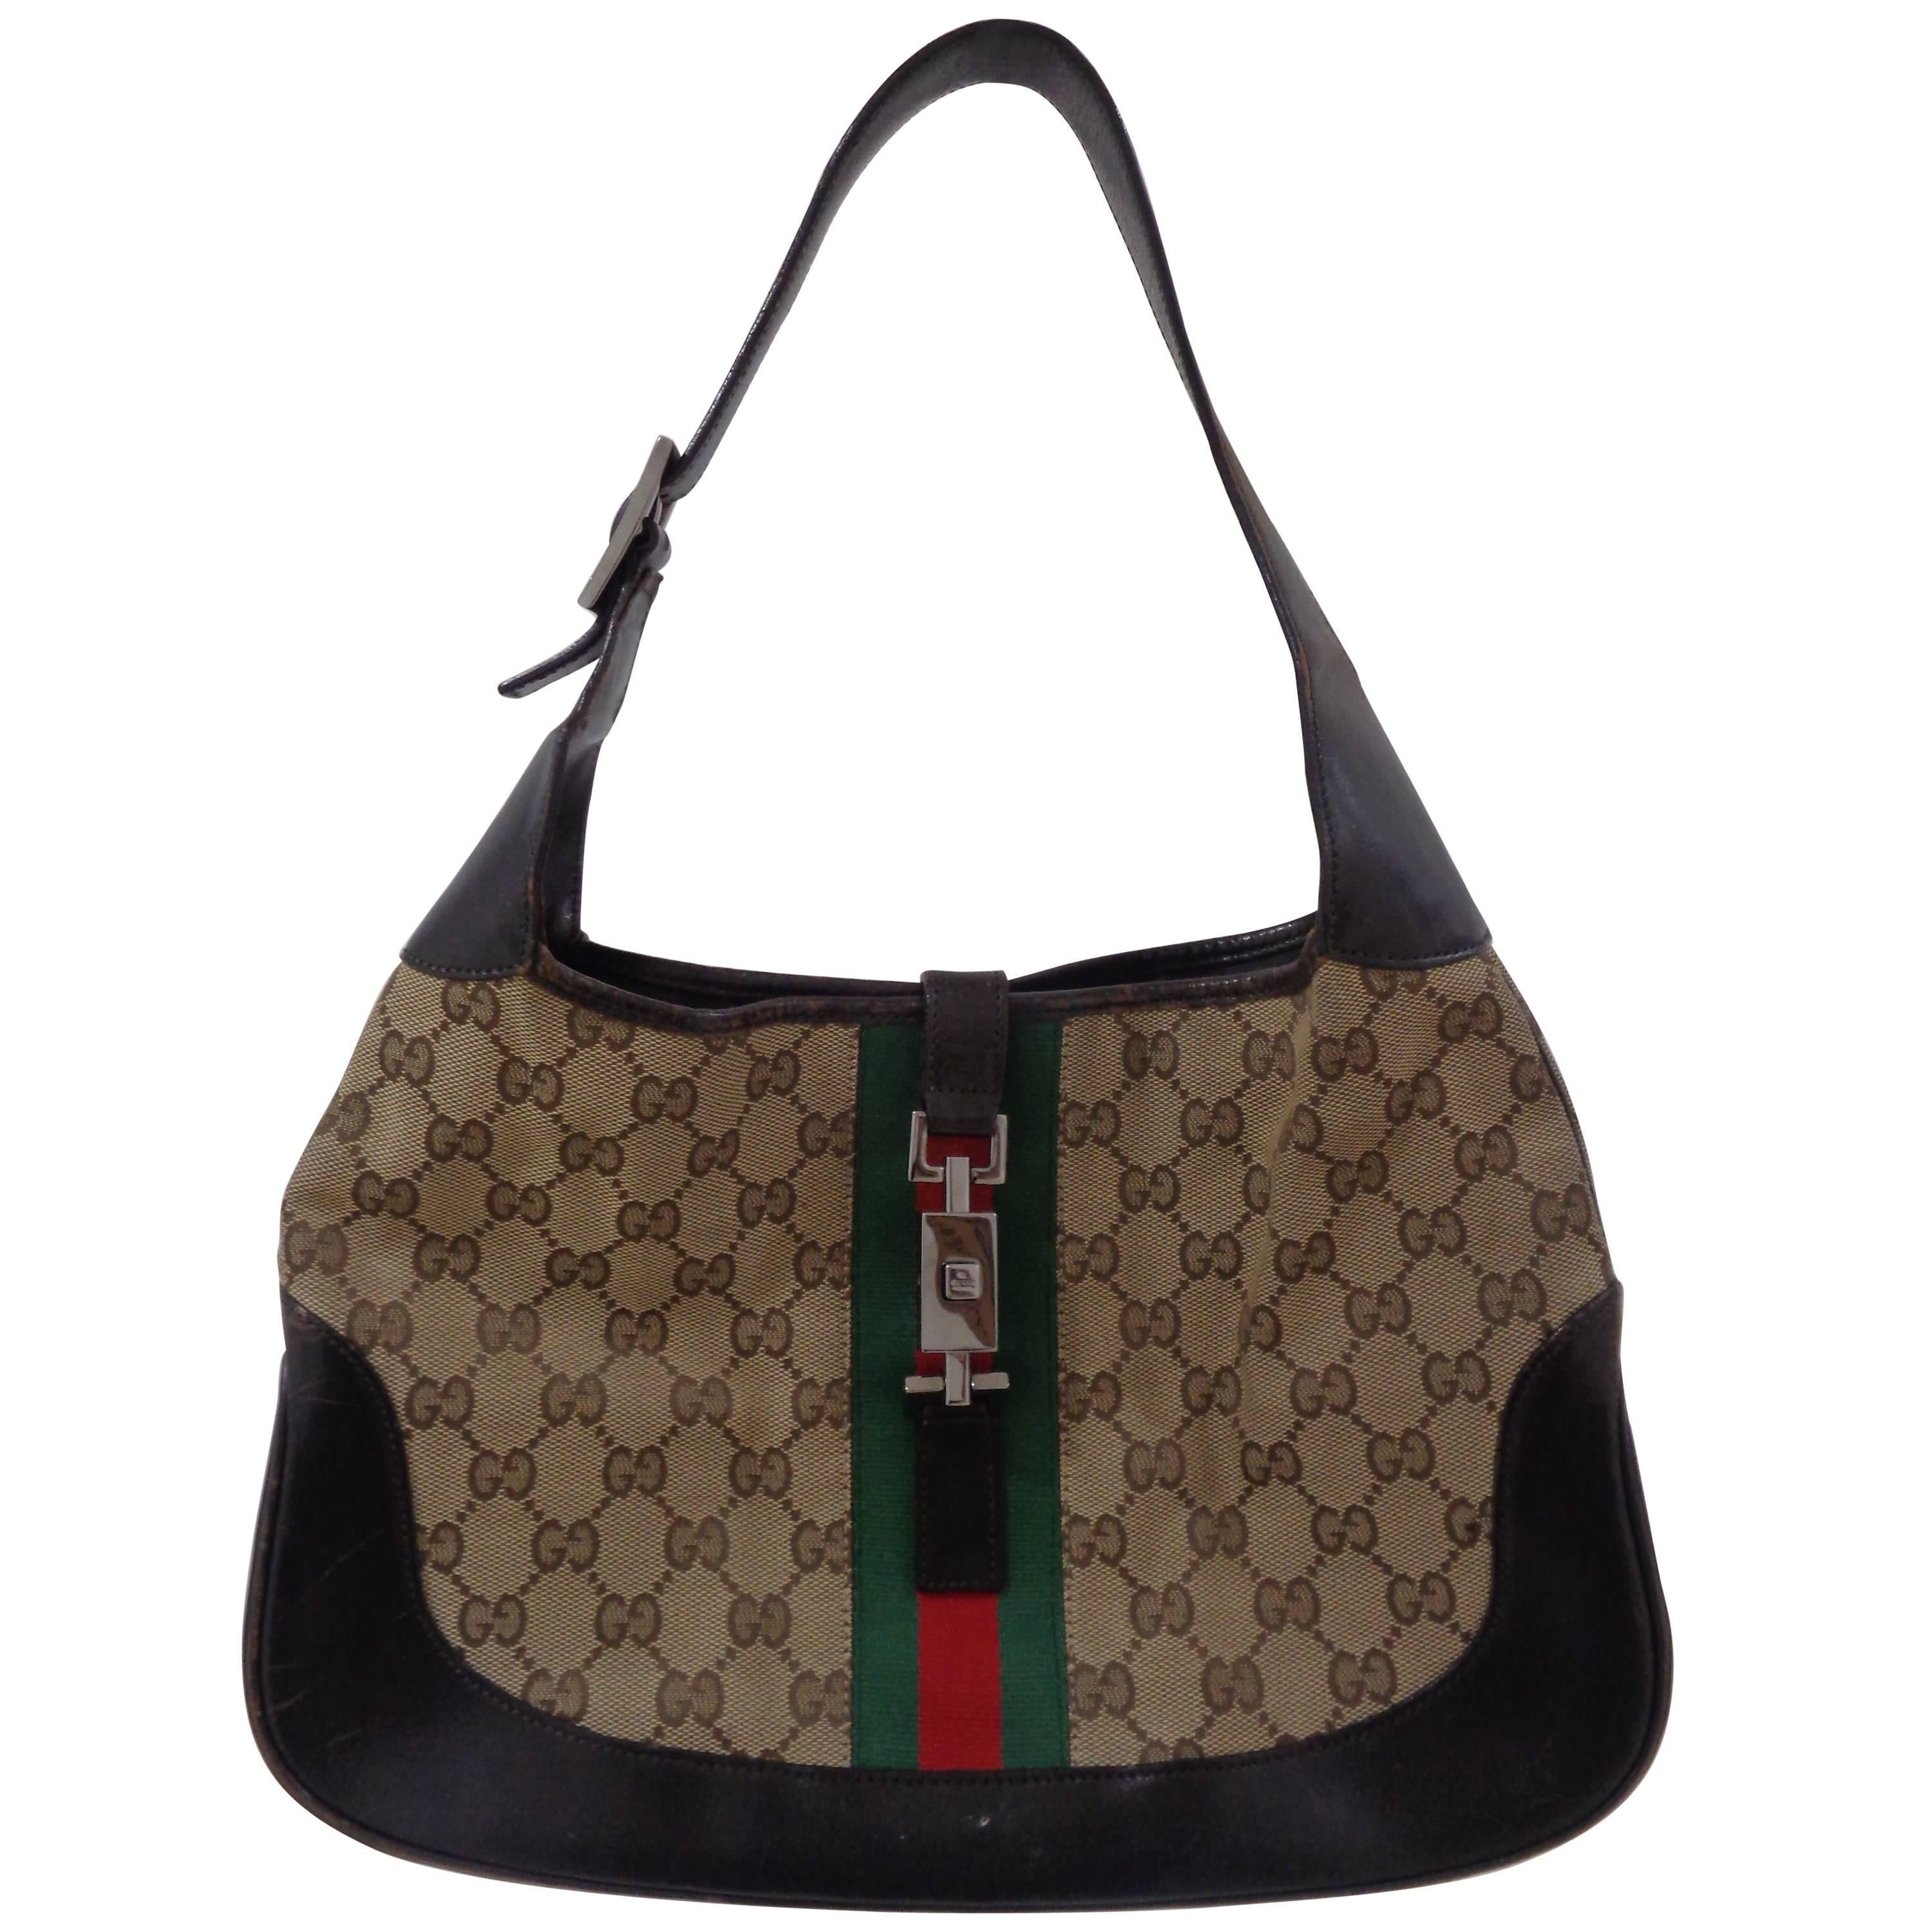 Gucci GG logo brown leather jackie bag